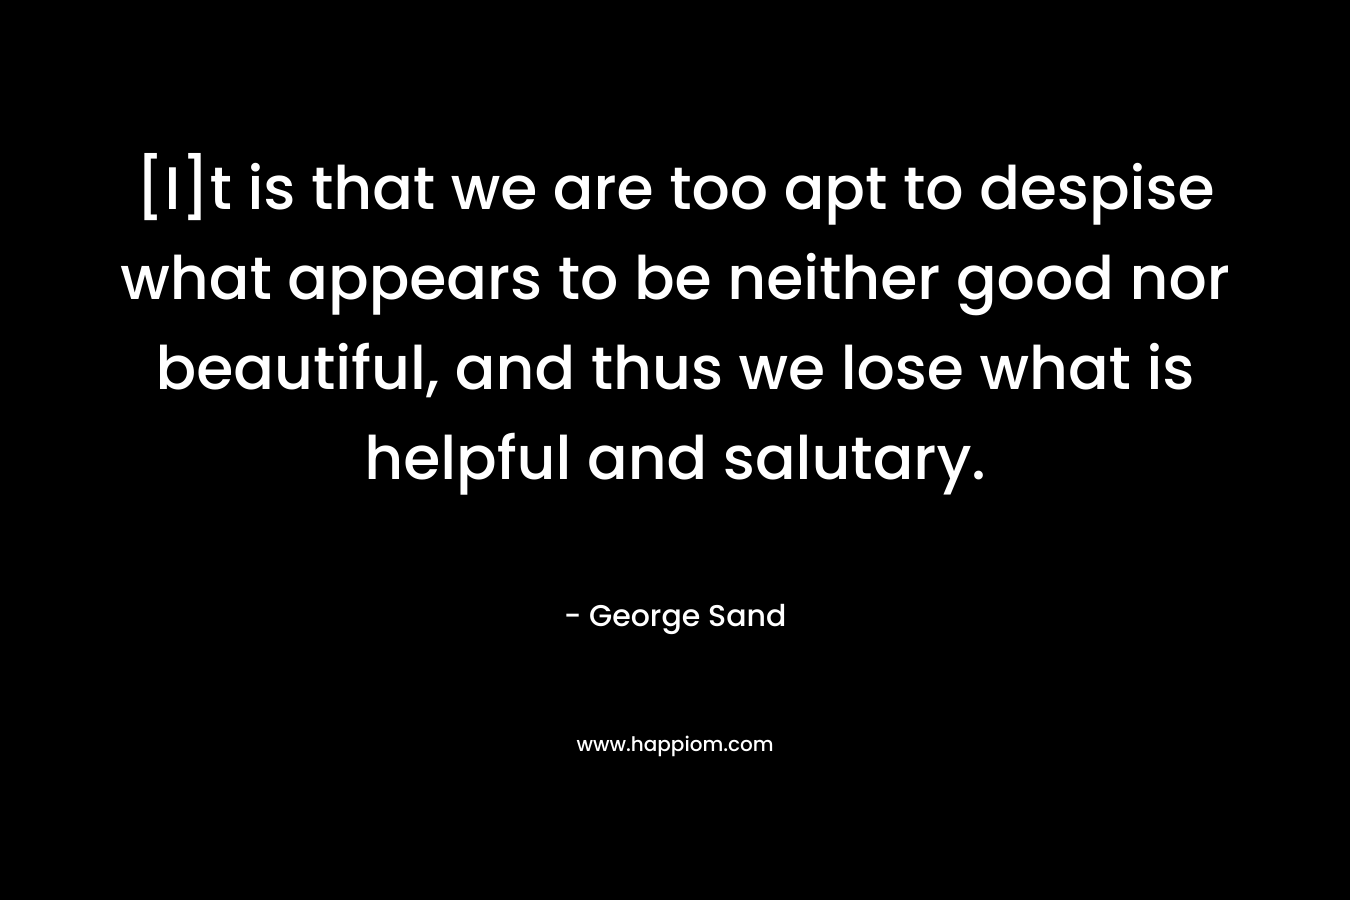 [I]t is that we are too apt to despise what appears to be neither good nor beautiful, and thus we lose what is helpful and salutary. – George Sand